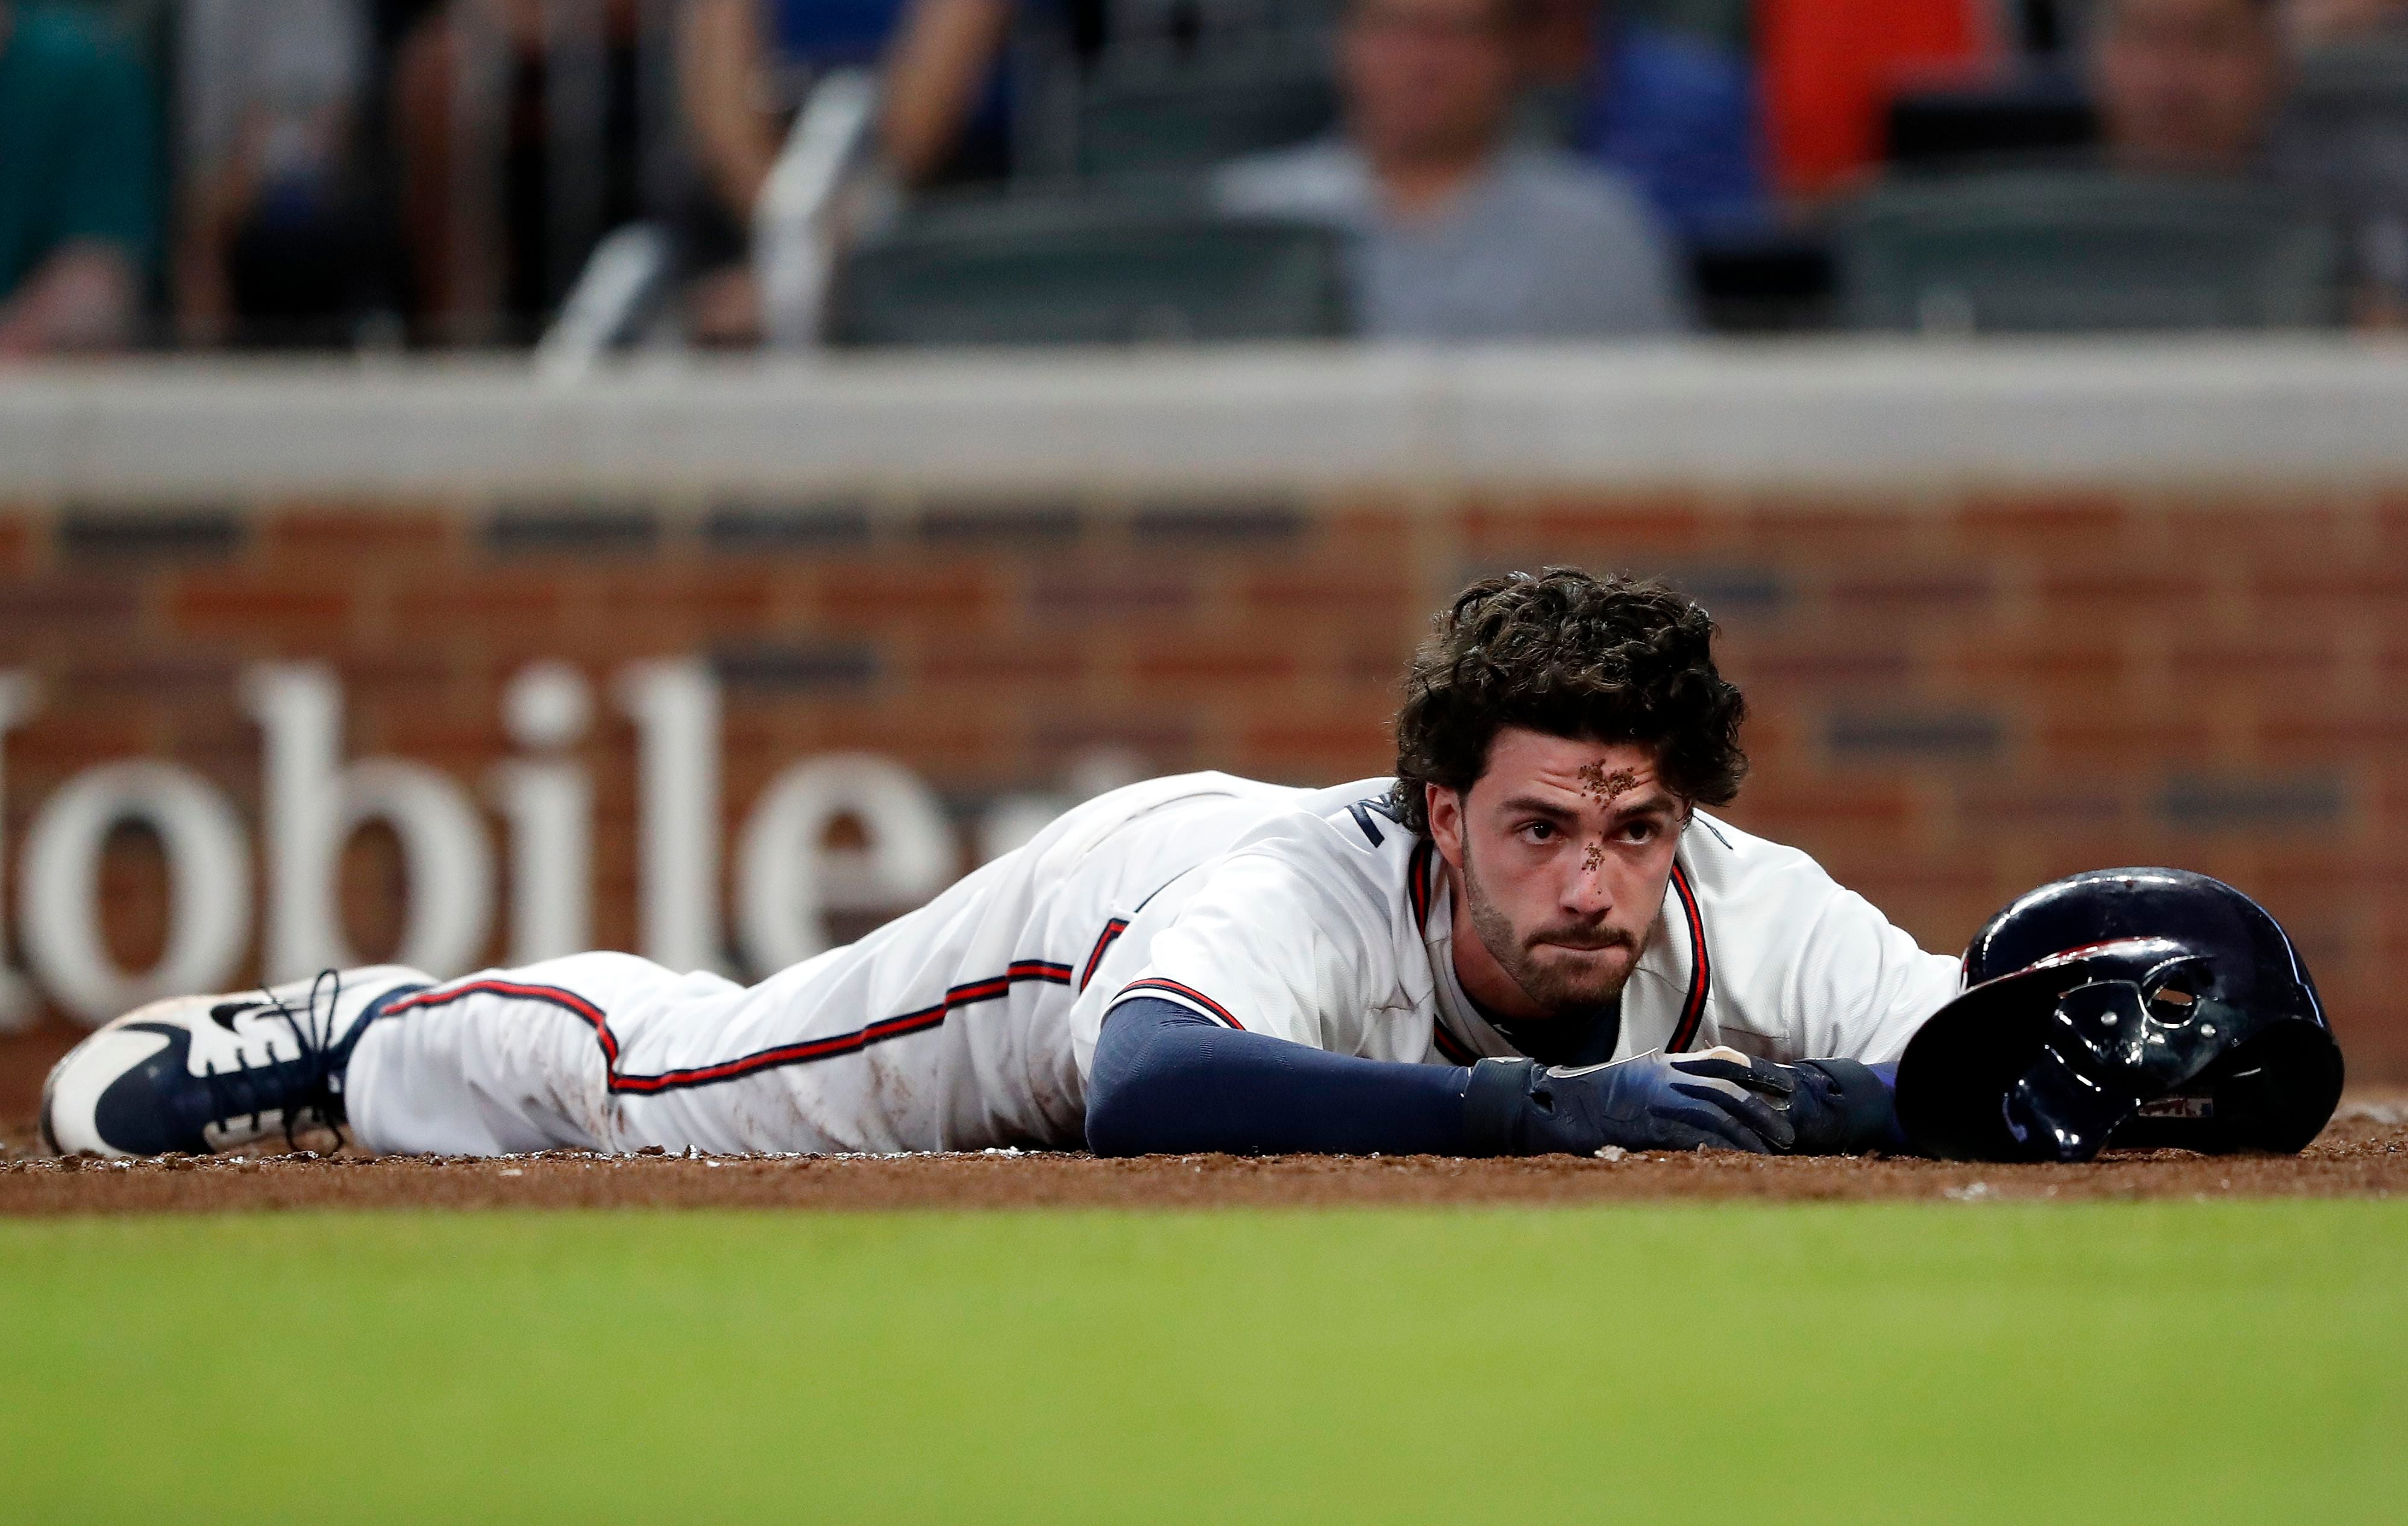 Dansby Swanson batting 2nd could be glimpse at Braves in 2017